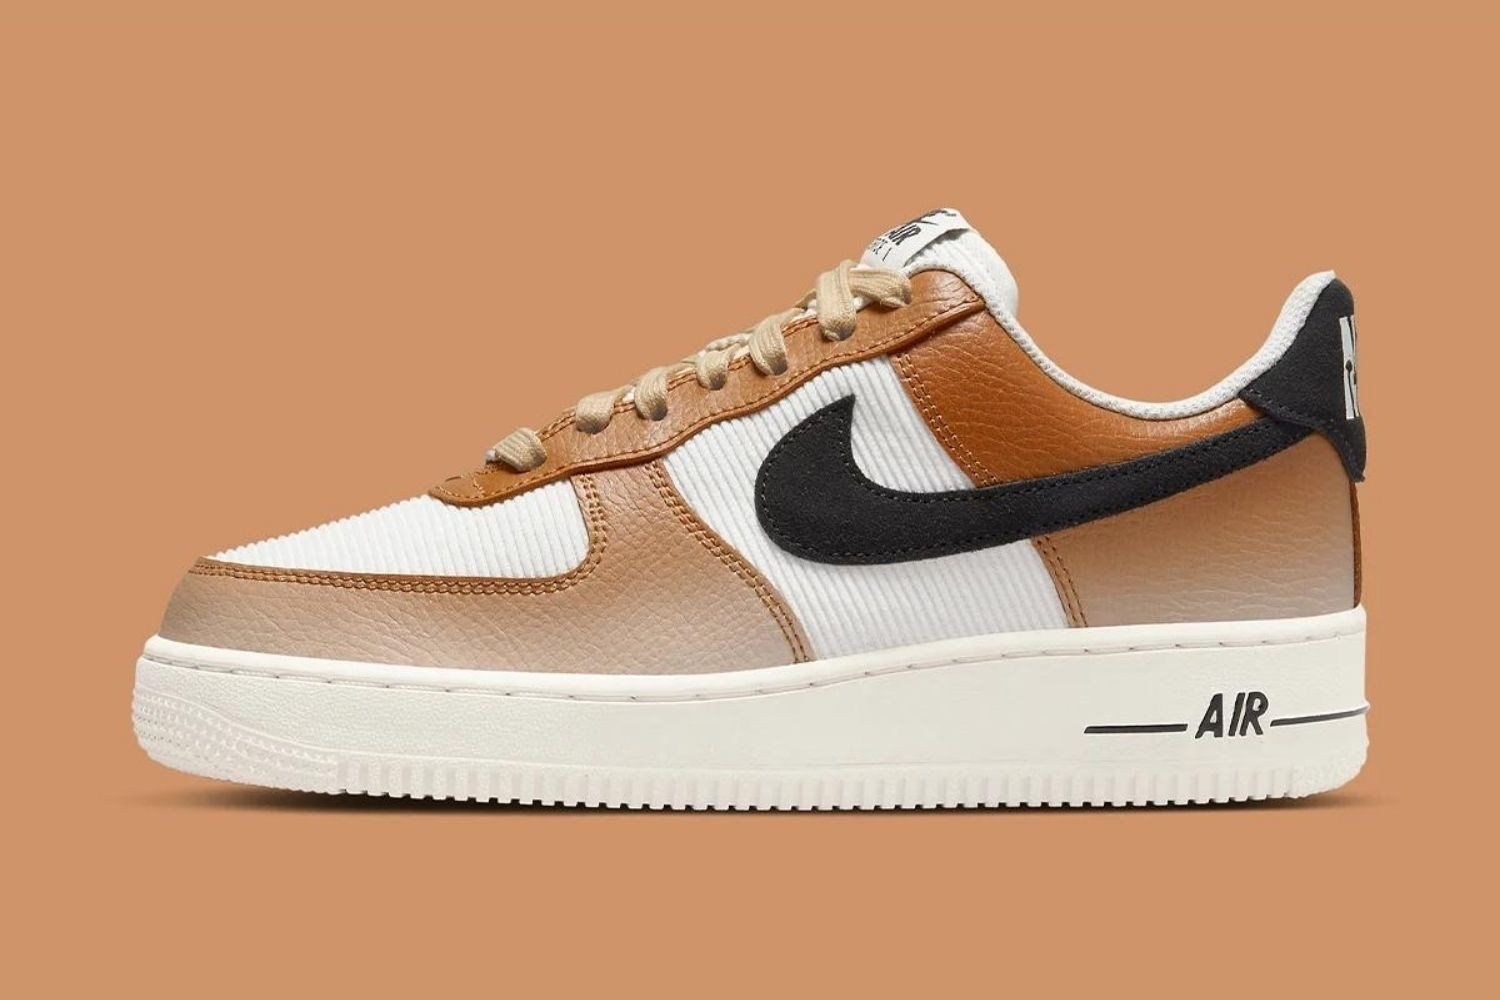 Take a look at the Nike Air Force 1 Low 'Mushroom'